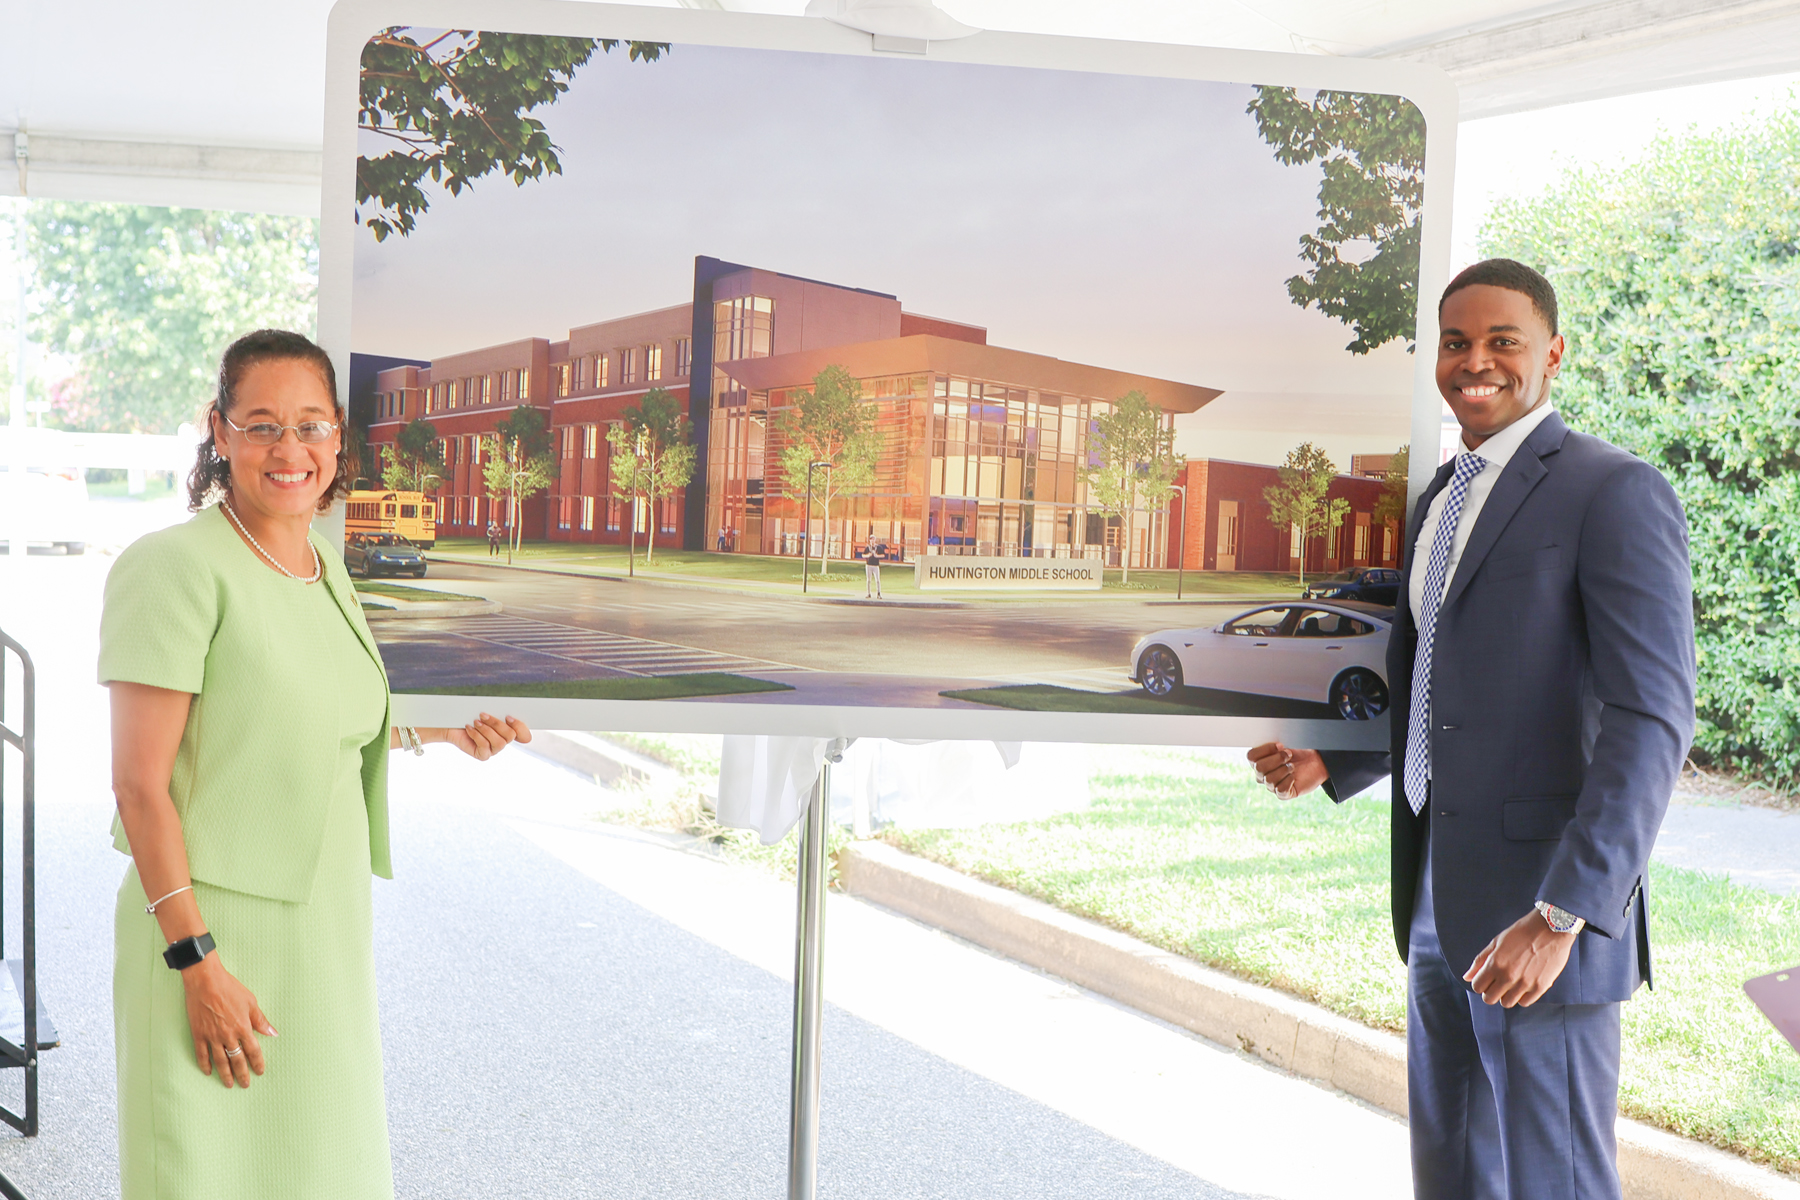 School Board Chair Lisa Surles-Law and Mayor Phillip Jones unveiled a rendering of the planned Huntington Middle School.